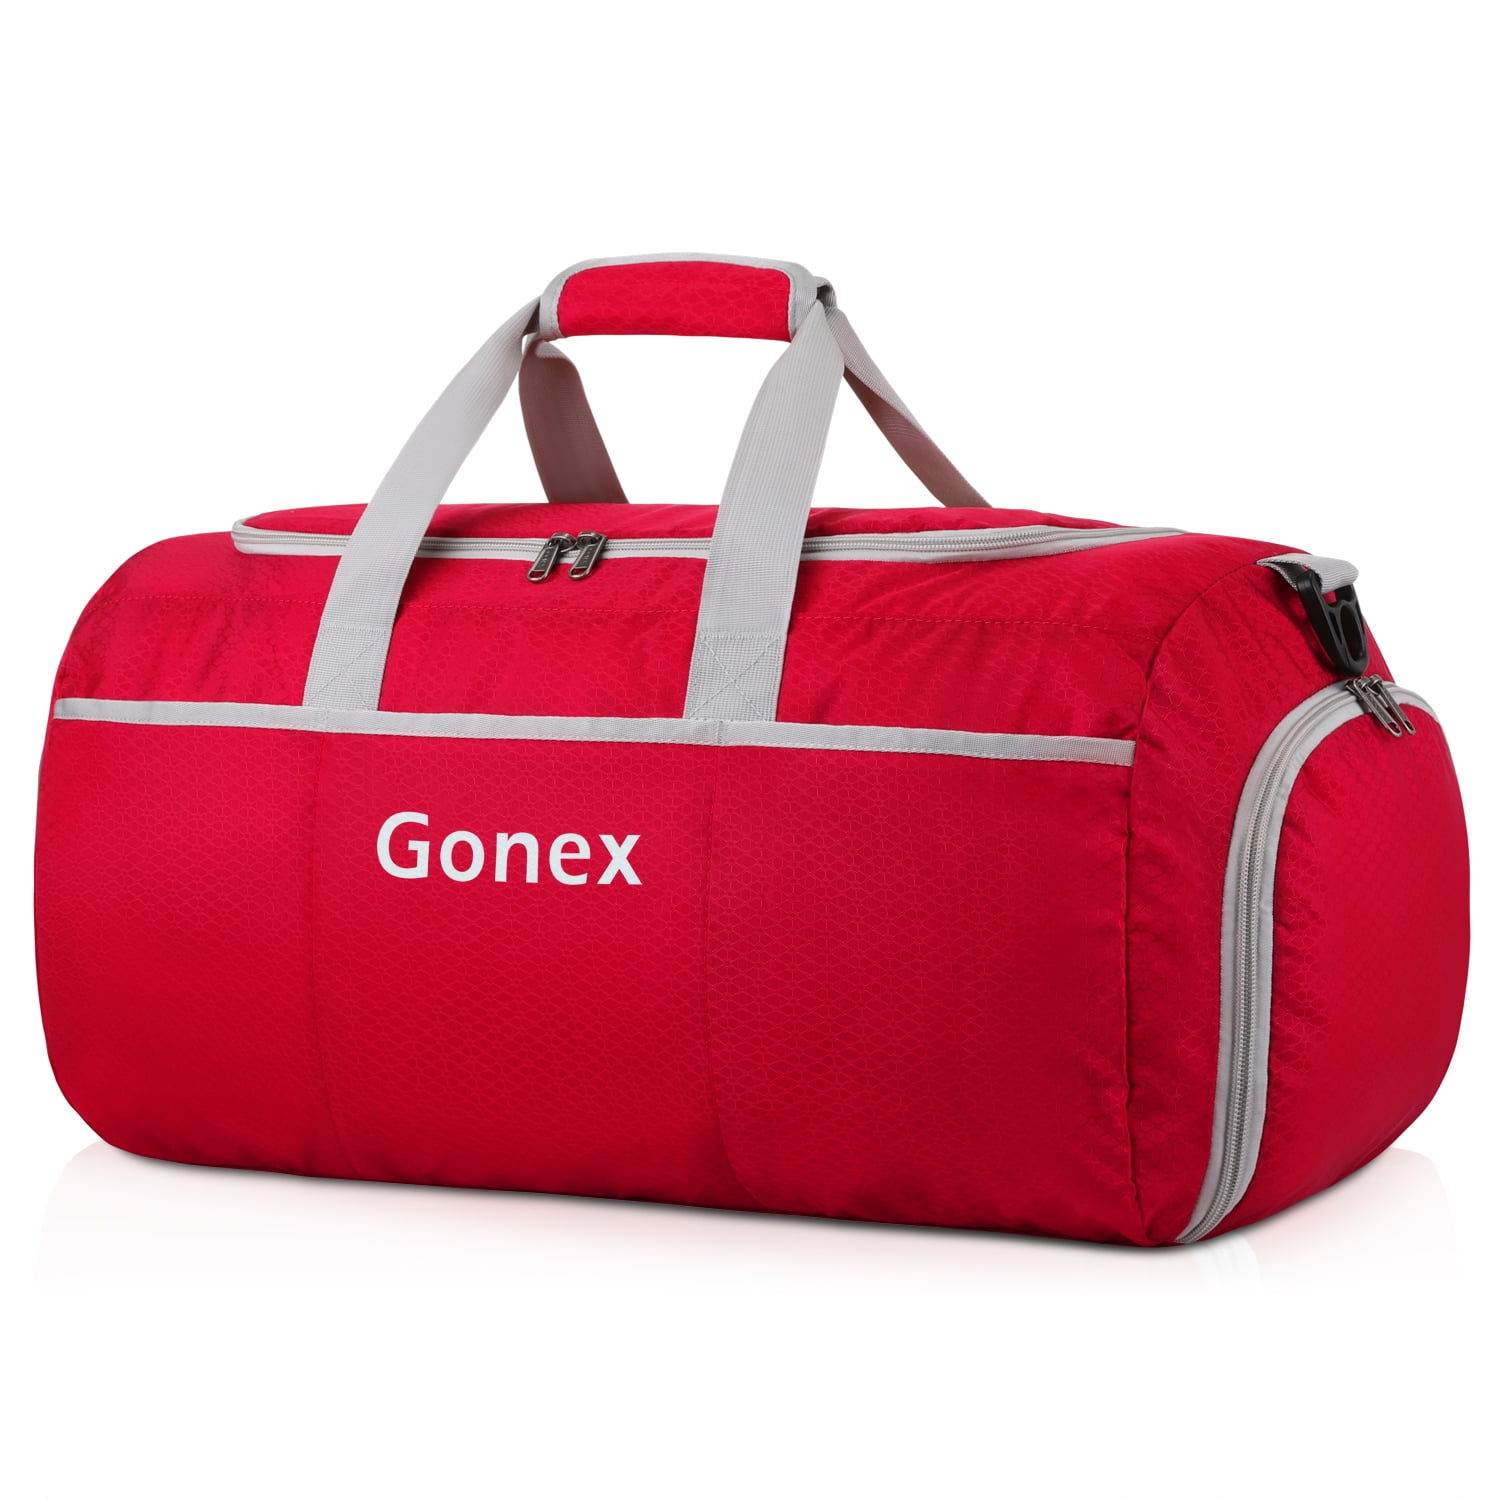 Lightweight Luggage Duffel Sports Gym Bag with Shoe Compartment Gonex 90L Packable Travel Duffle 